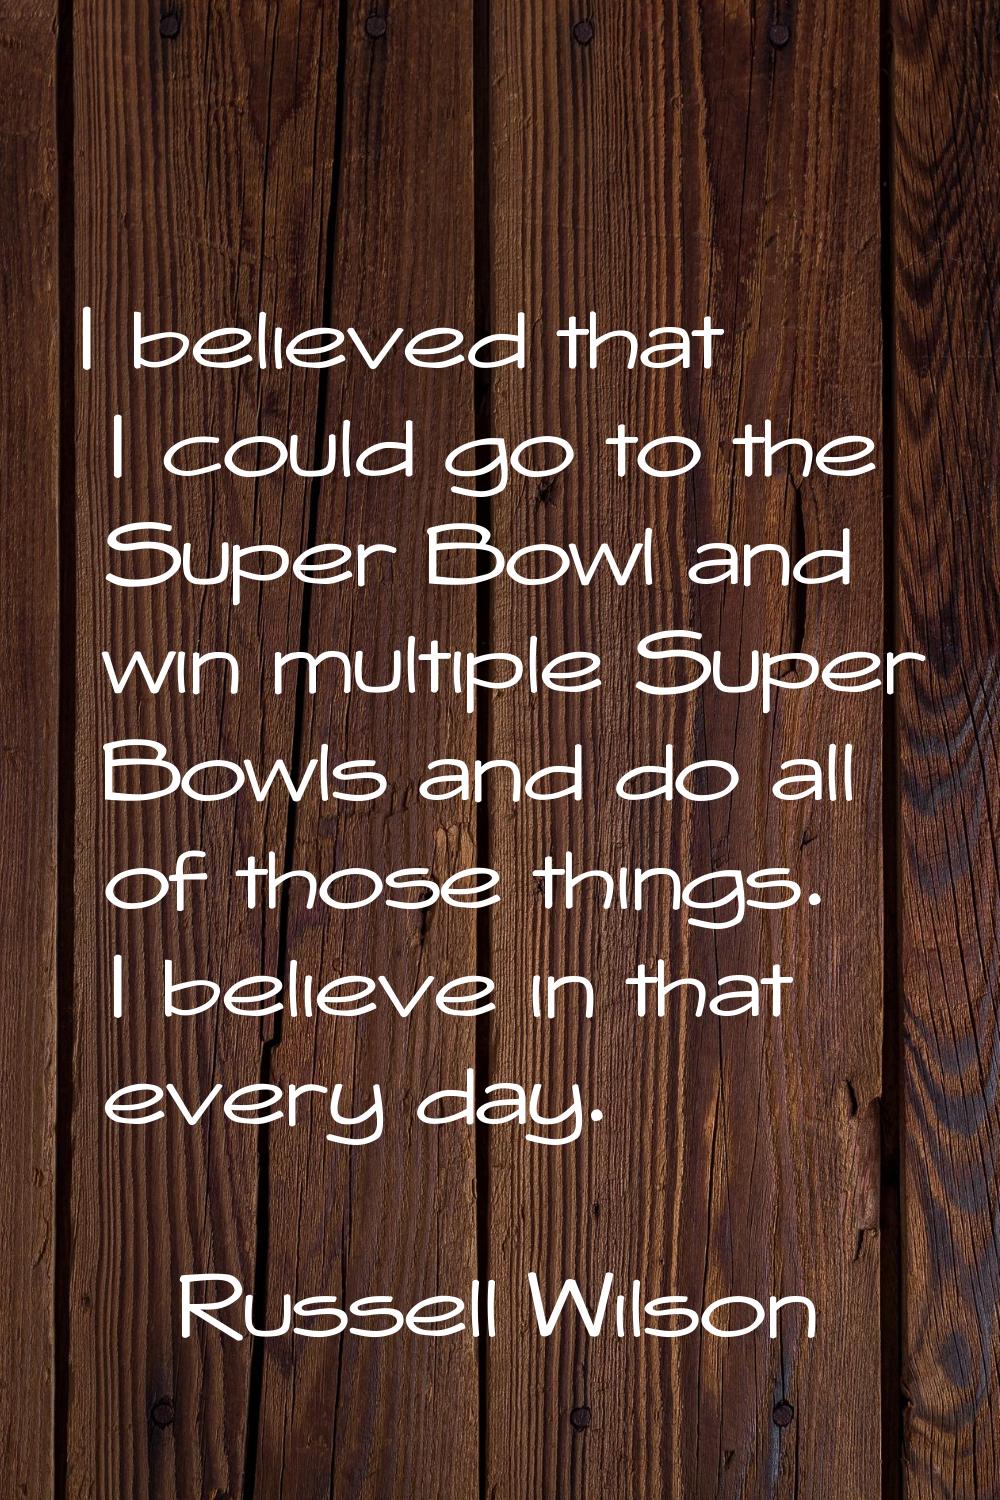 I believed that I could go to the Super Bowl and win multiple Super Bowls and do all of those thing